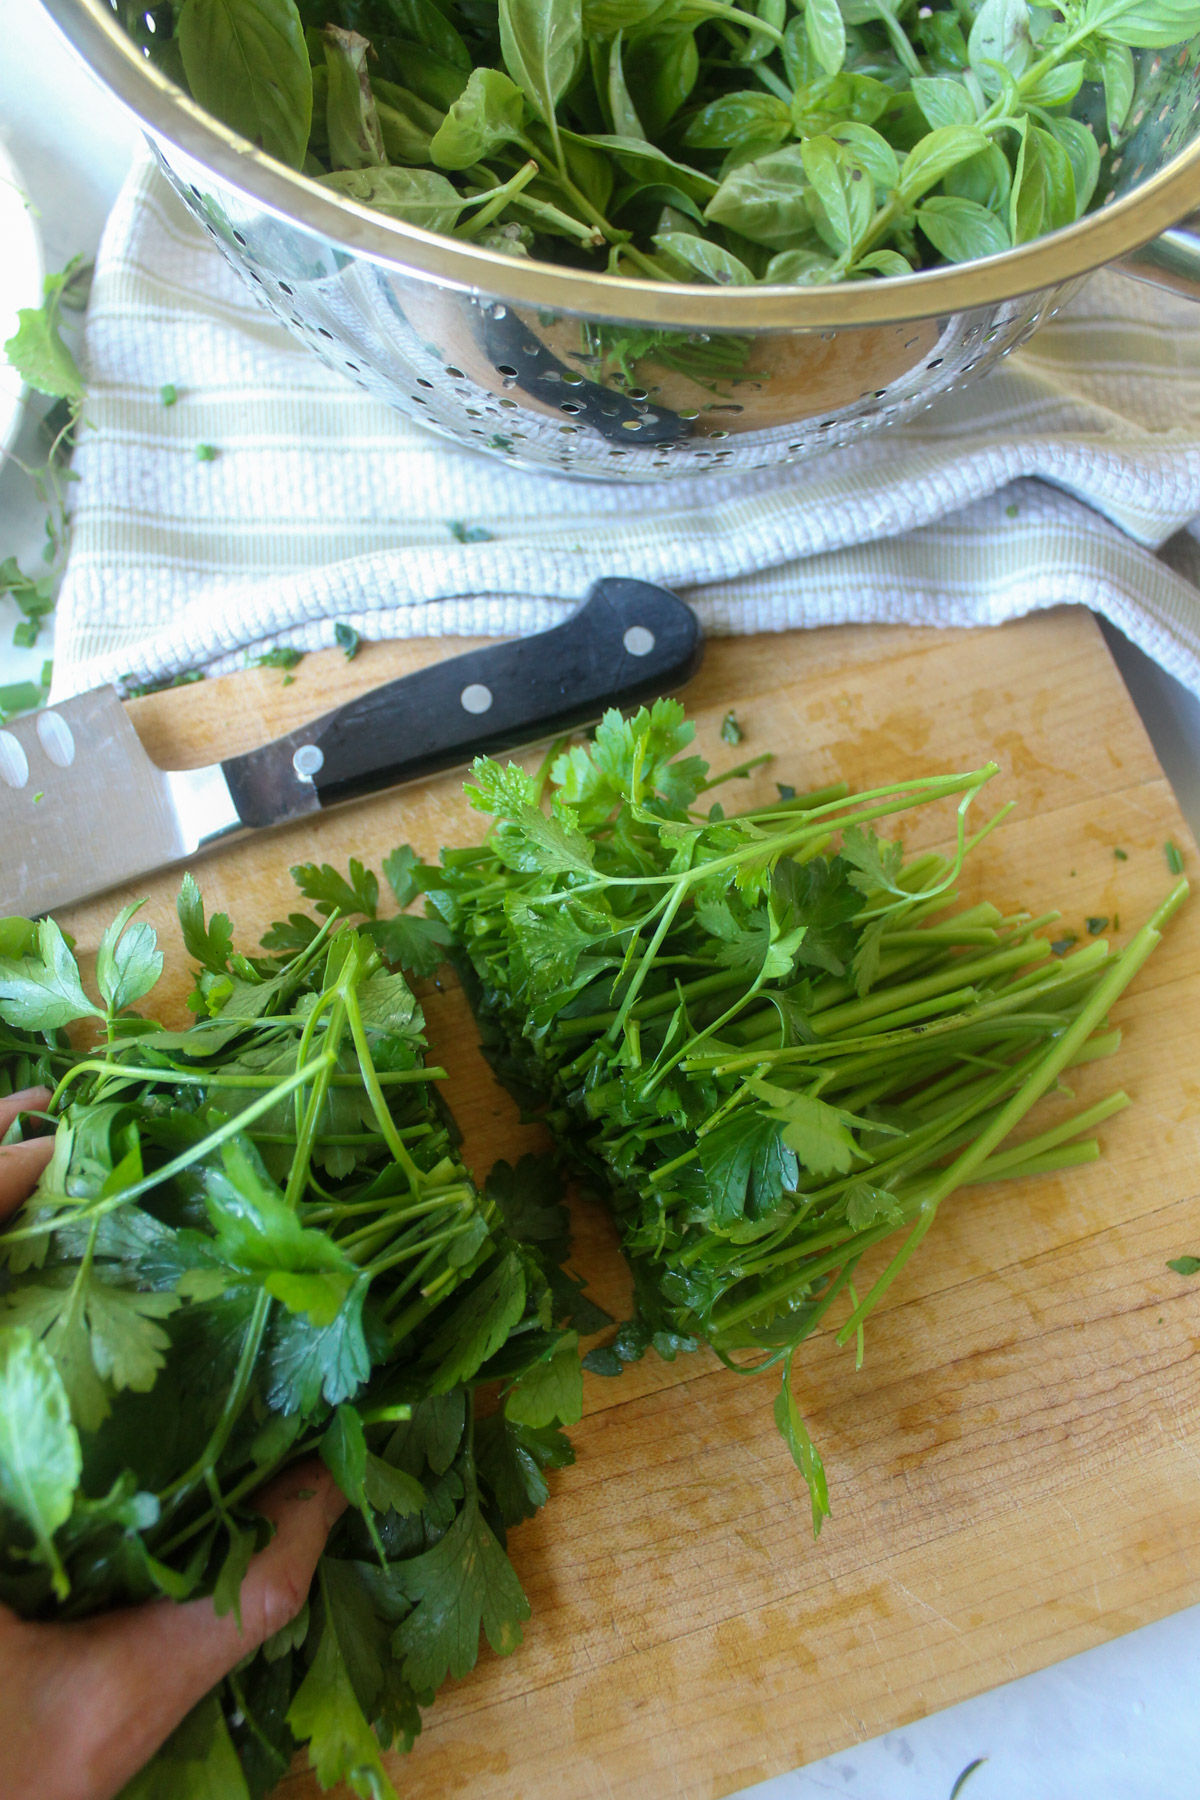 Chopping the stems from a bunch of parsley.